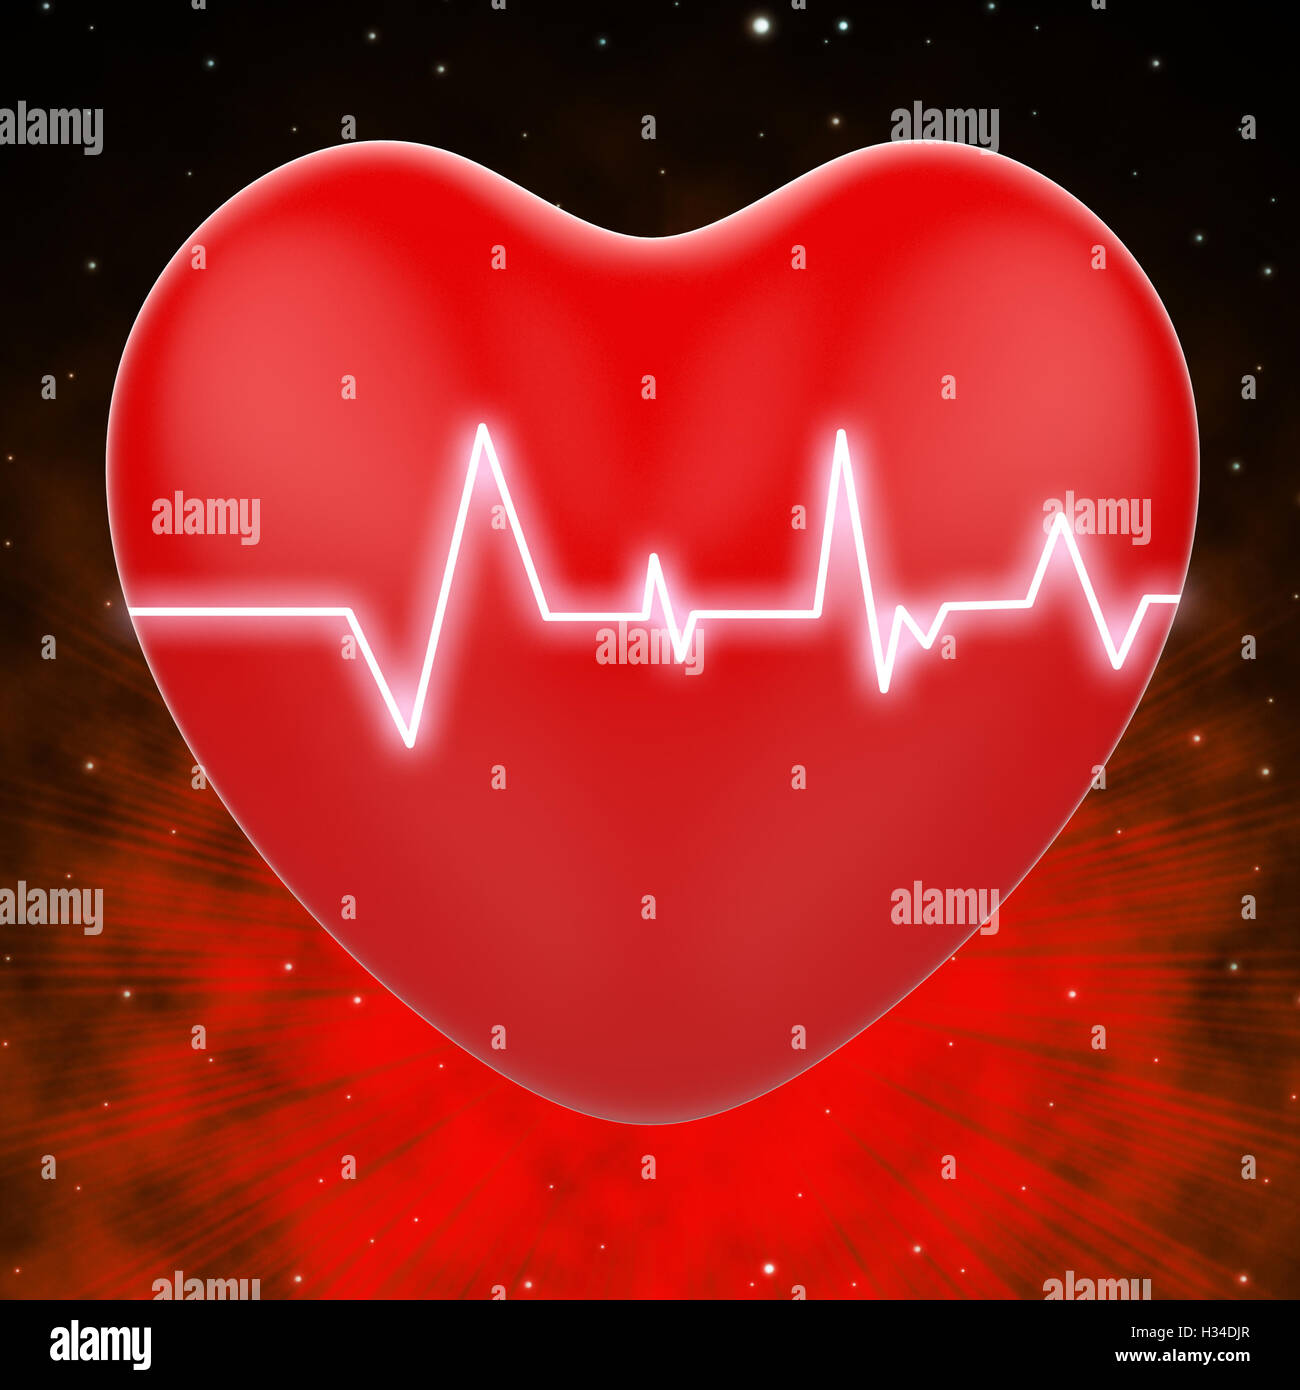 Electro On Heart Shows Heart Pressure Or Extreme Passion Stock Photo